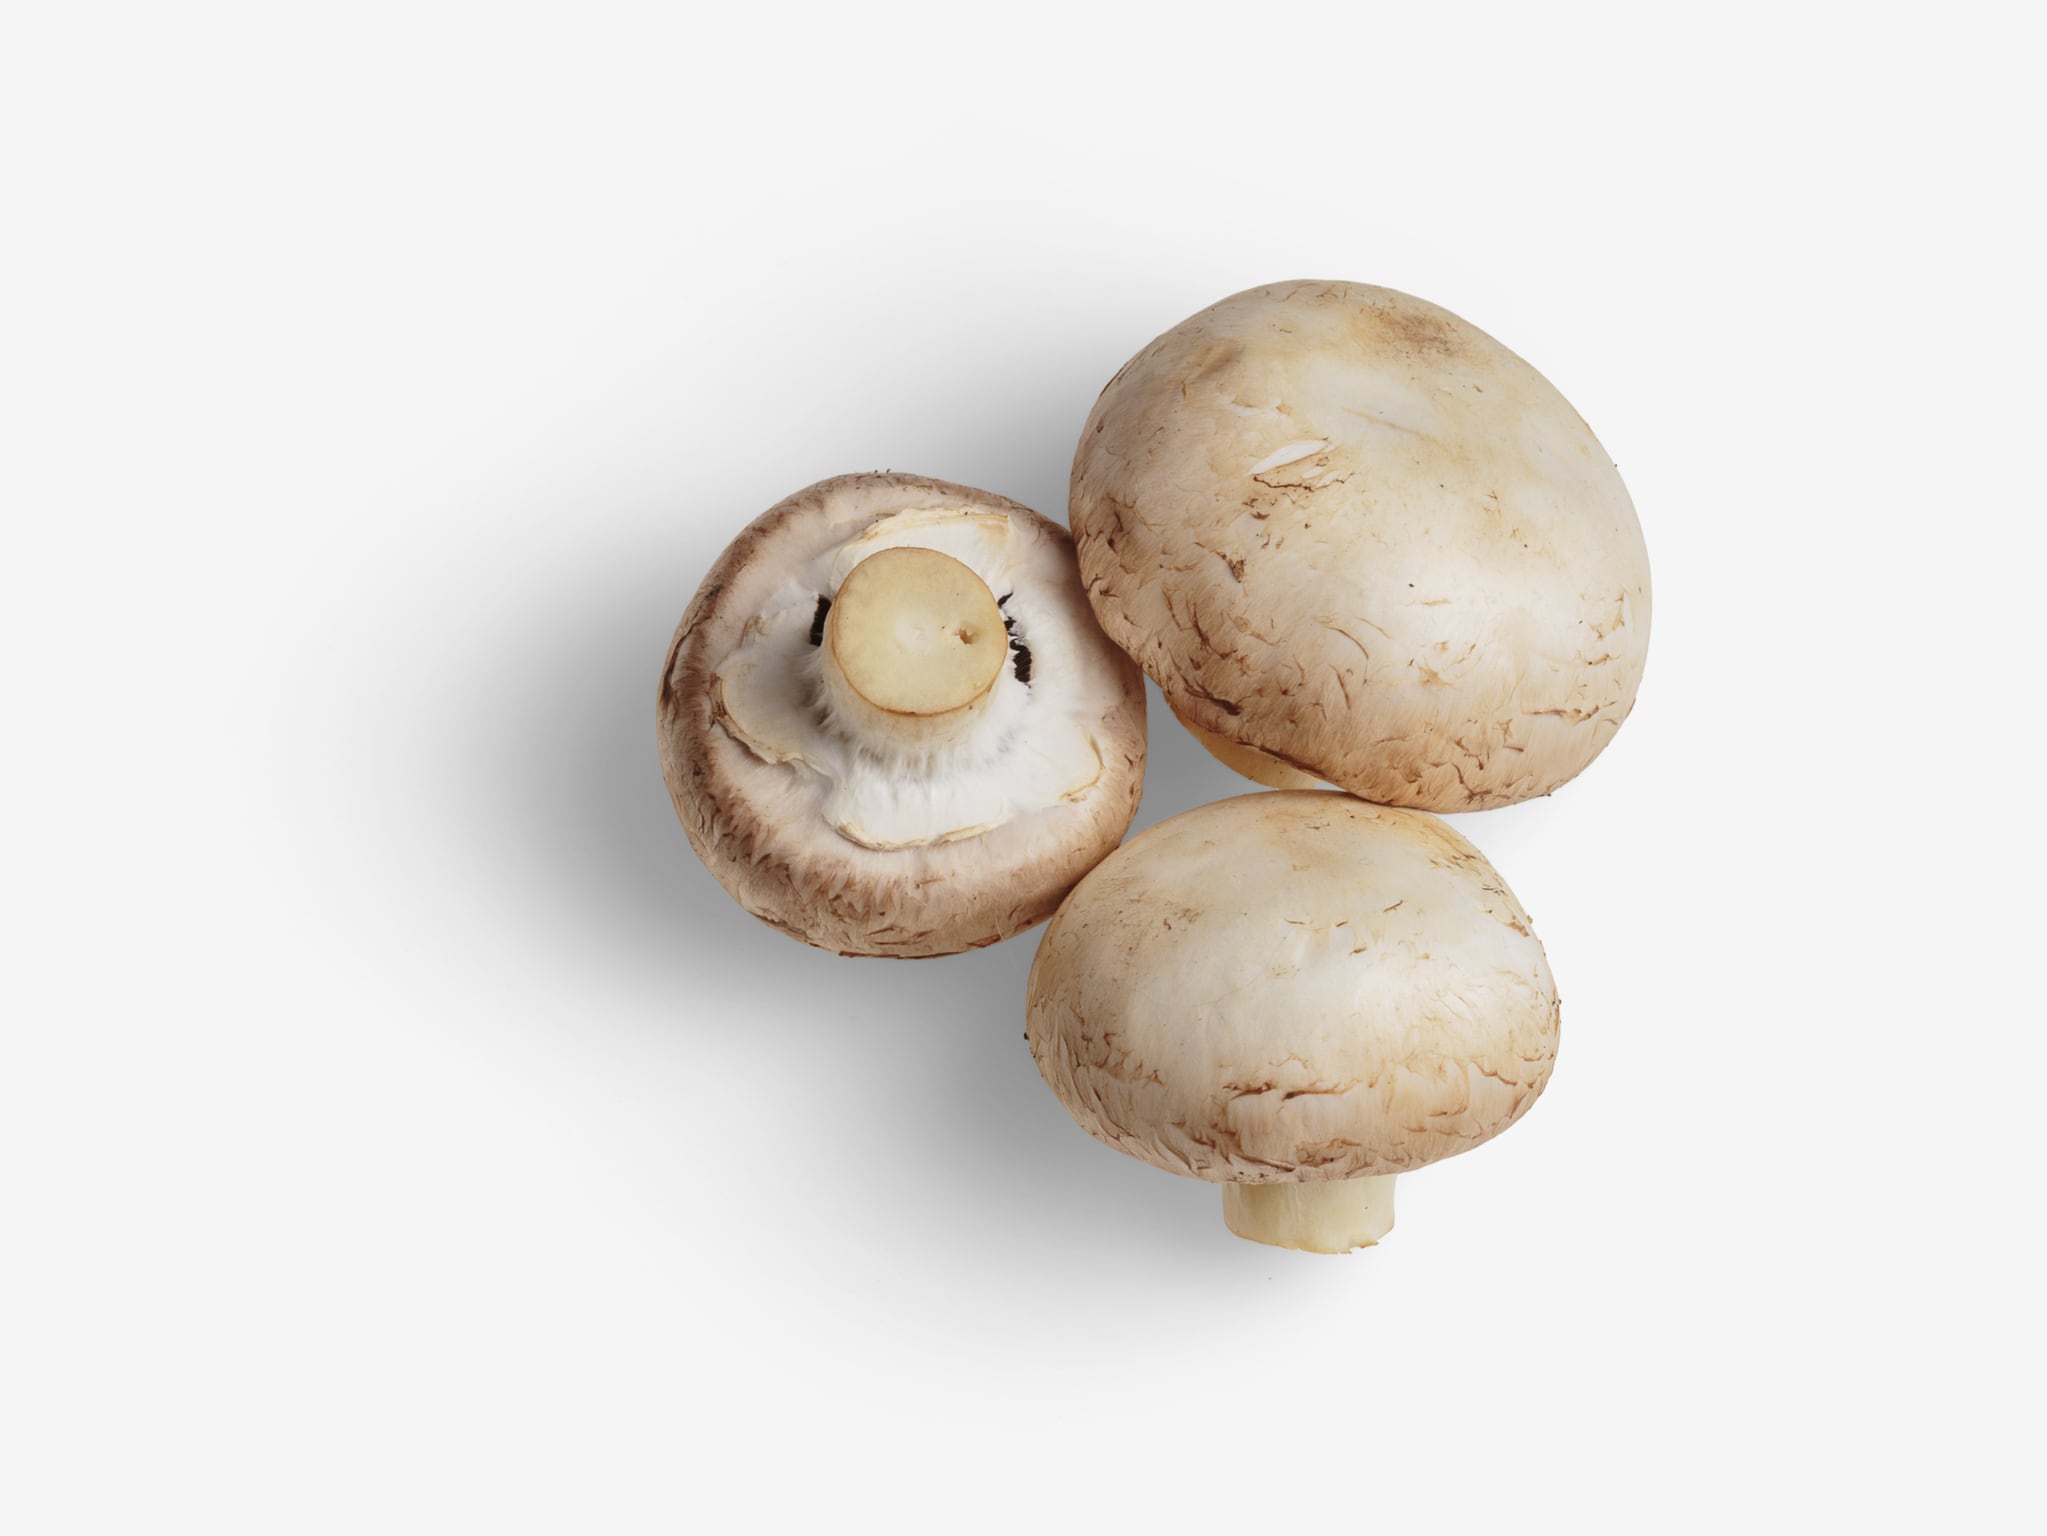 Champignon PSD image with transparent background